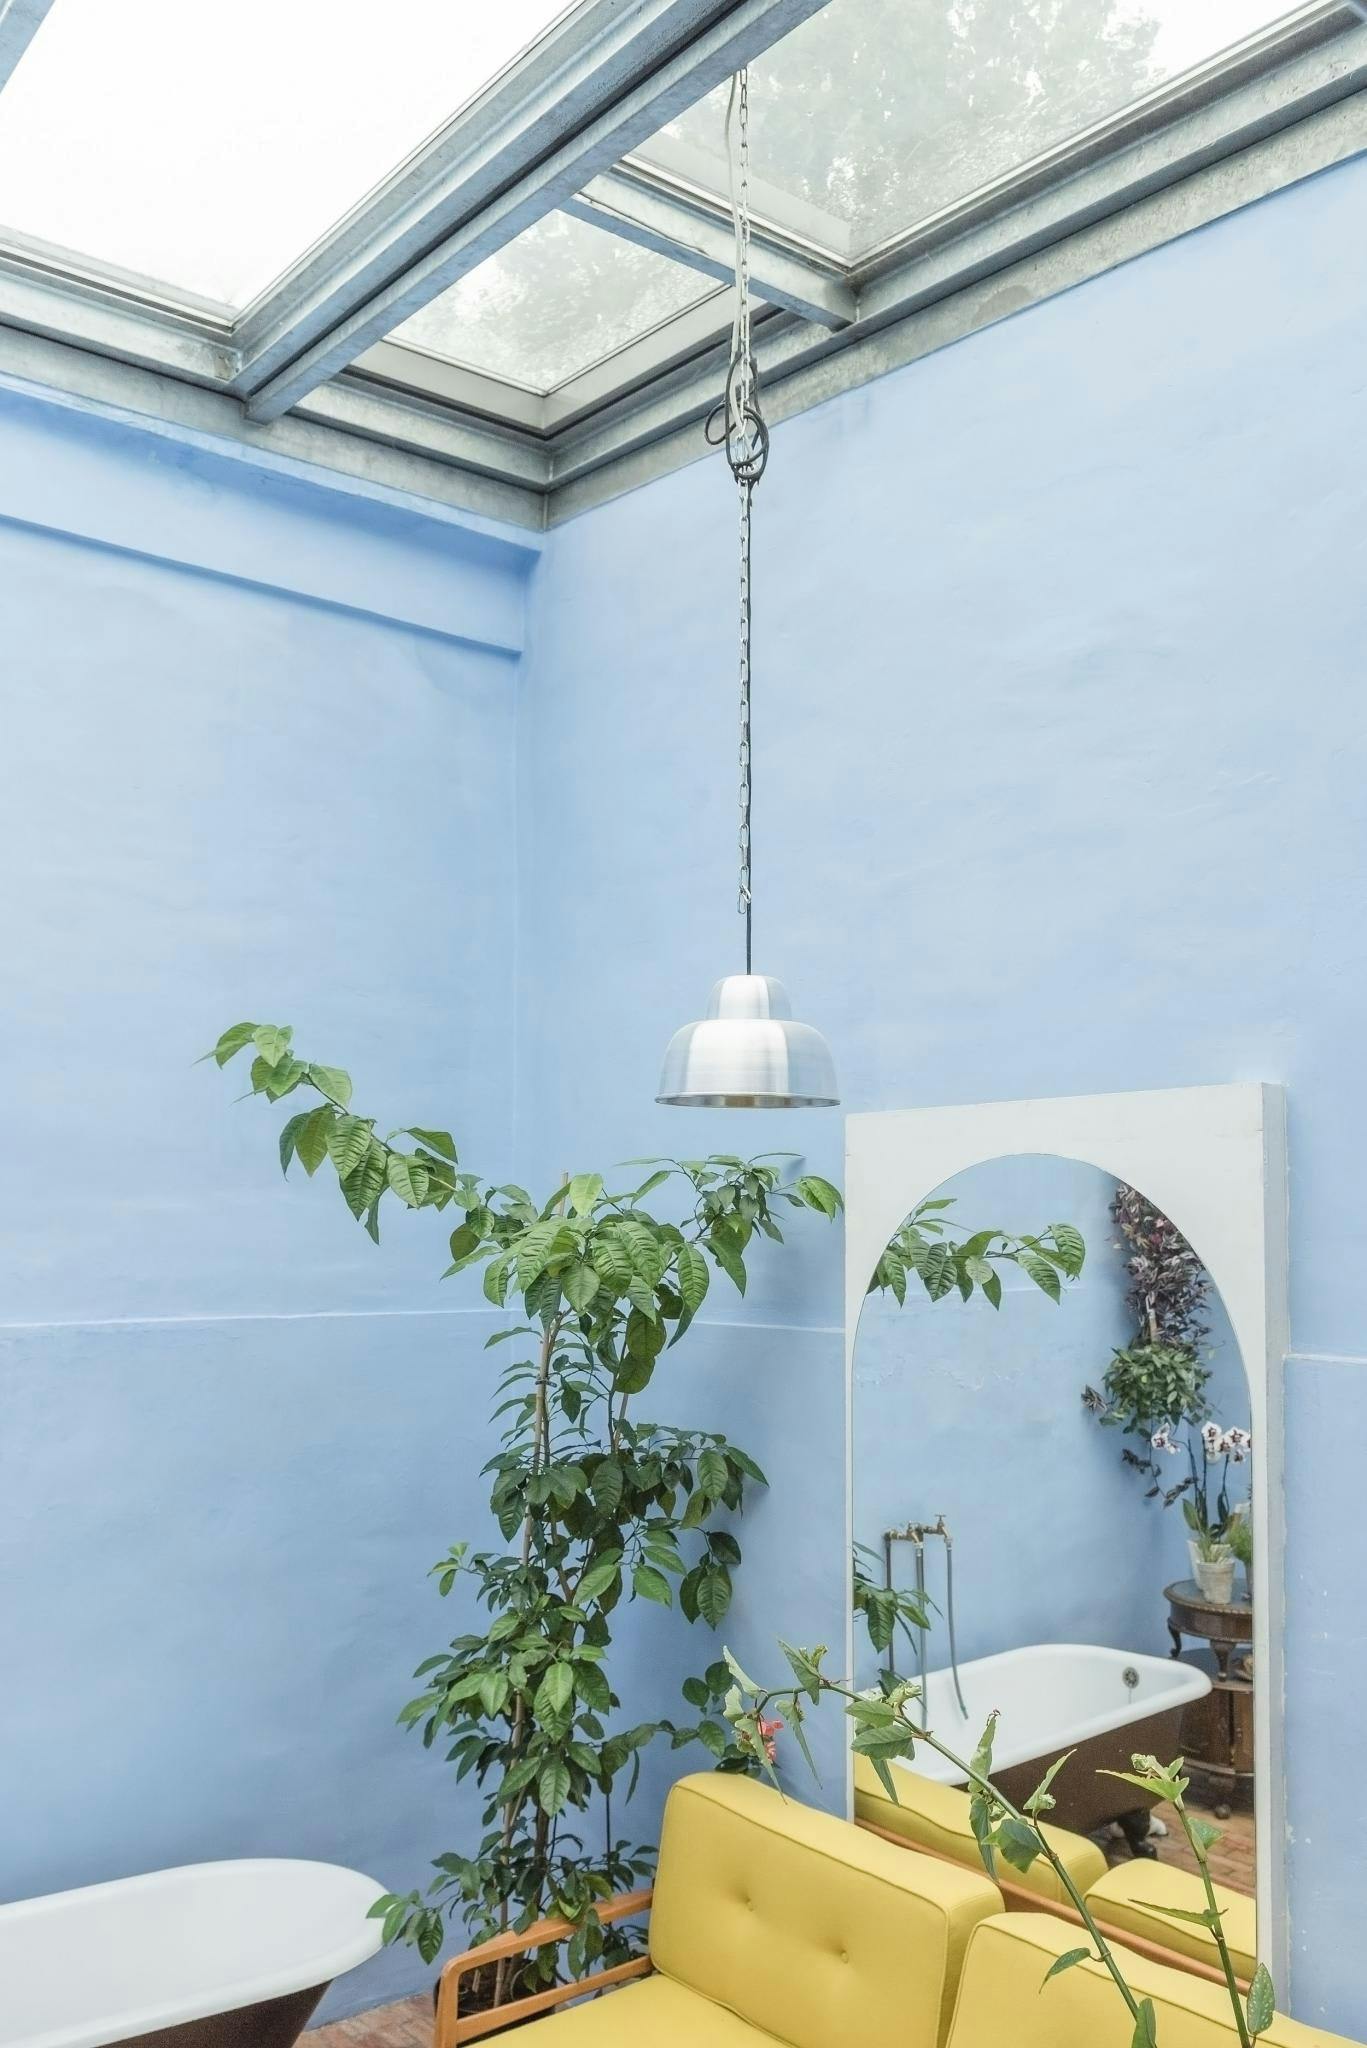 The image features a bathroom with a blue wall, a white bathtub, a mirror, a toilet, and a potted plant.